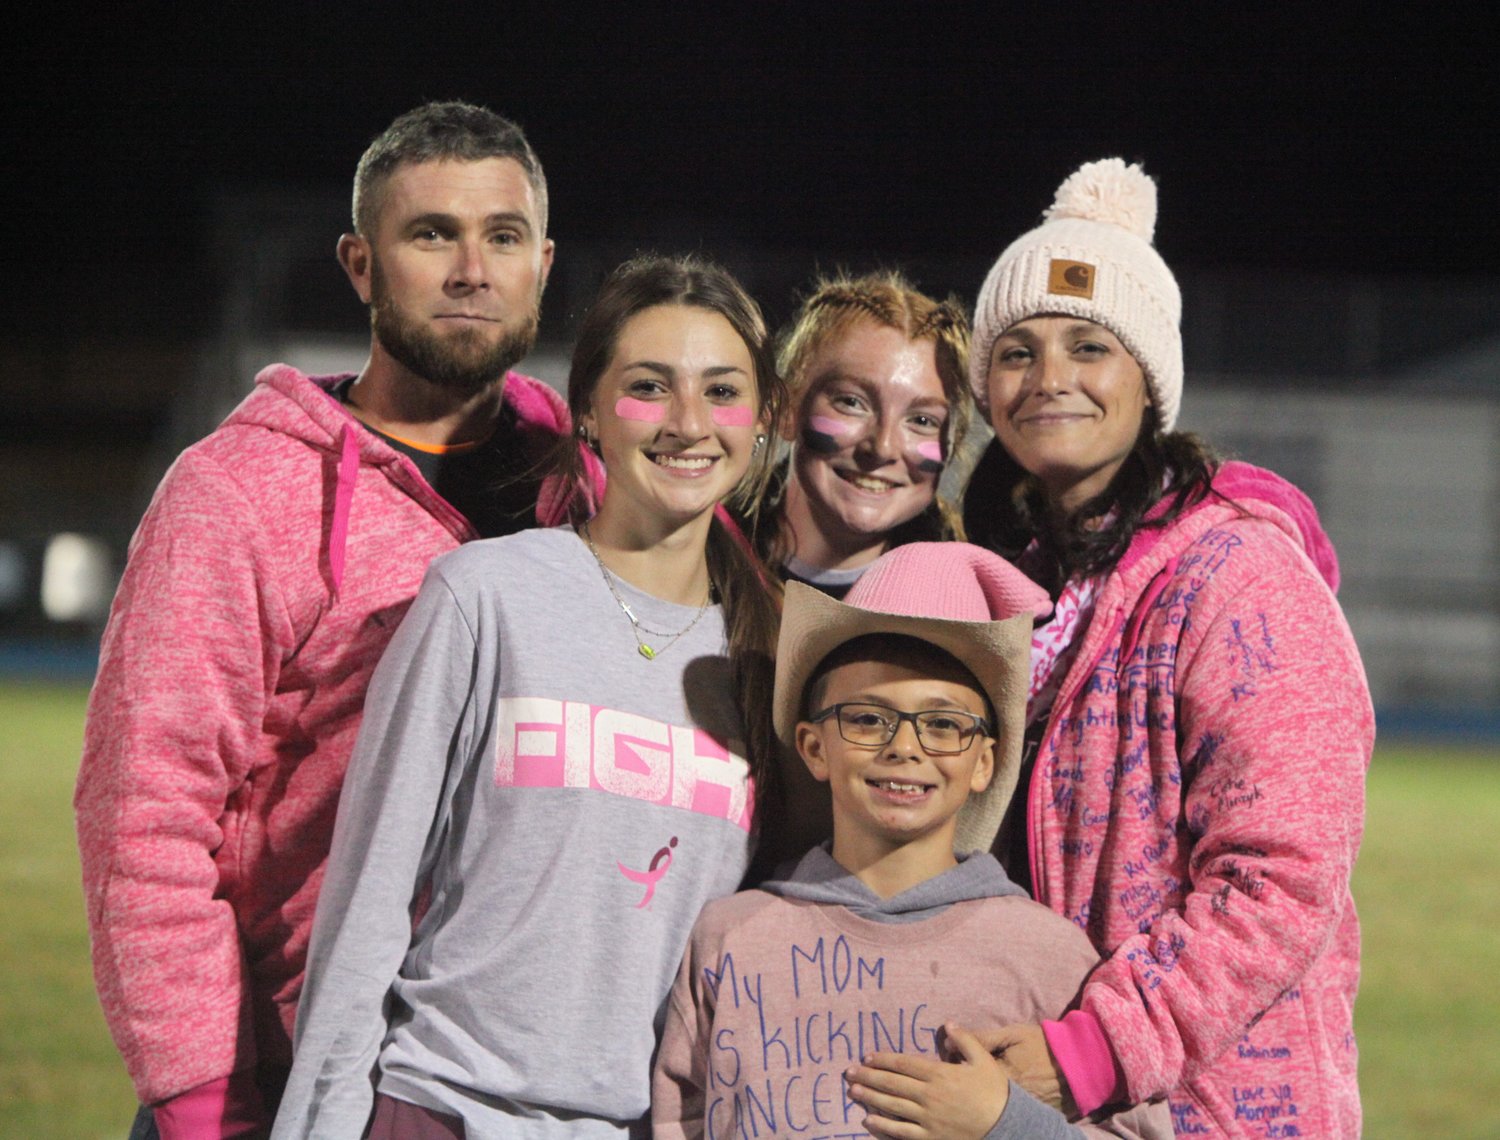 High Hill resident Jessica Eversmeyer, right, poses with her family that includes her husband, Josh, and children, Destani, Josy and William, during the Montgomery County High Powderpuff Football Game on Sept. 28 at Jim Blacklock Field. Eversmeyer is battling stage 4 breast cancer.